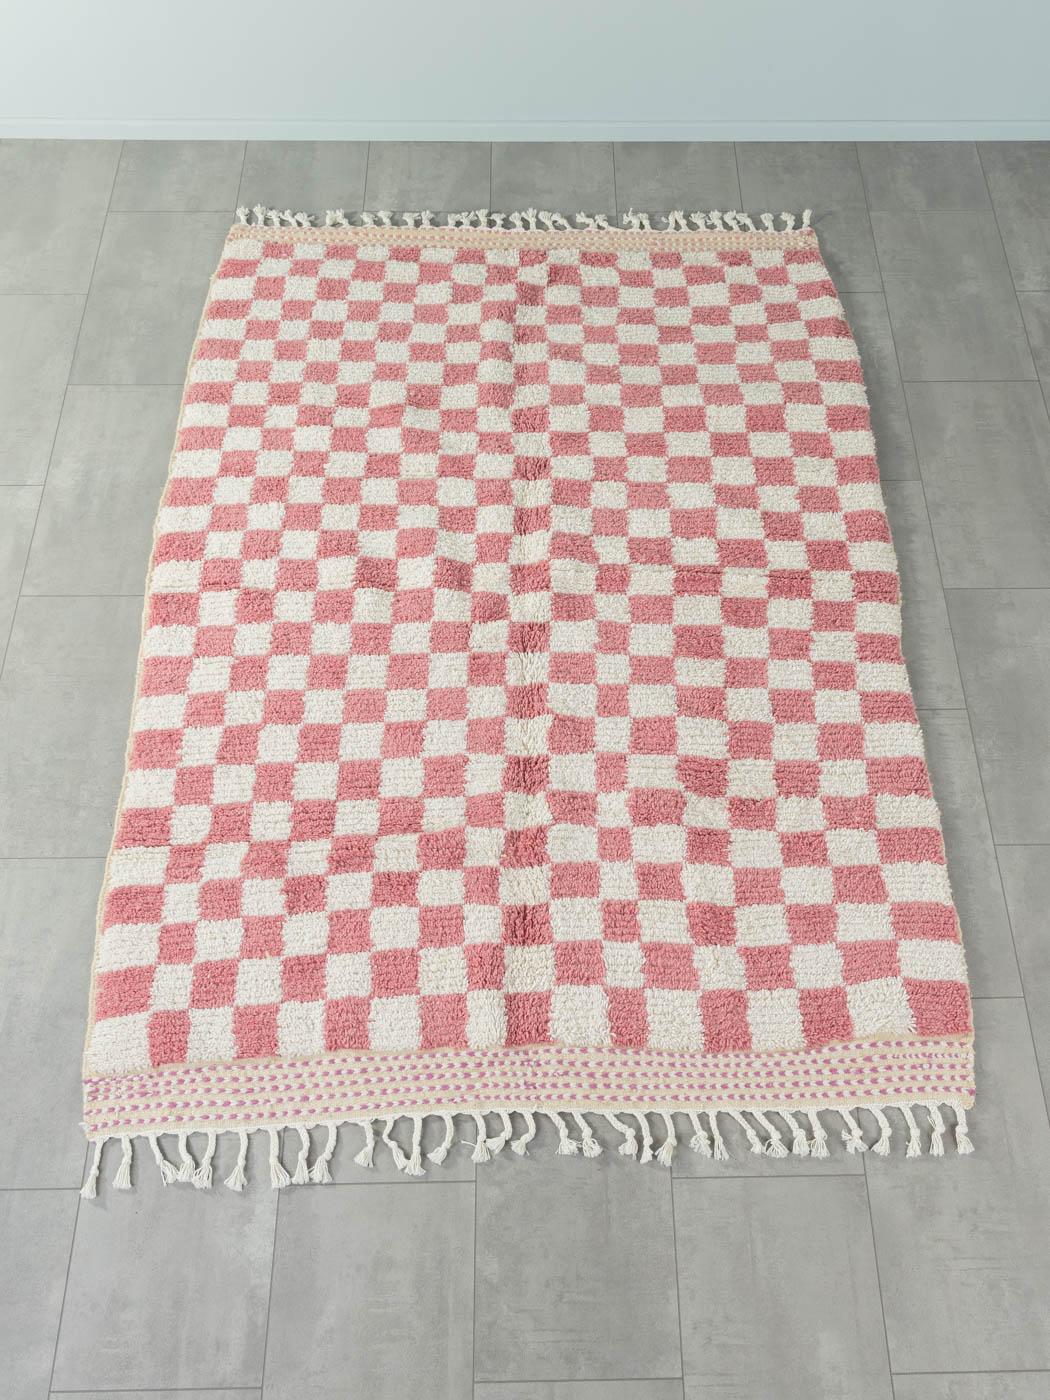 Pink Check is a contemporary 100% wool rug – thick and soft, comfortable underfoot. Our Berber rugs are handwoven and handknotted by Amazigh women in the Atlas Mountains. These communities have been crafting rugs for thousands of years. One knot at